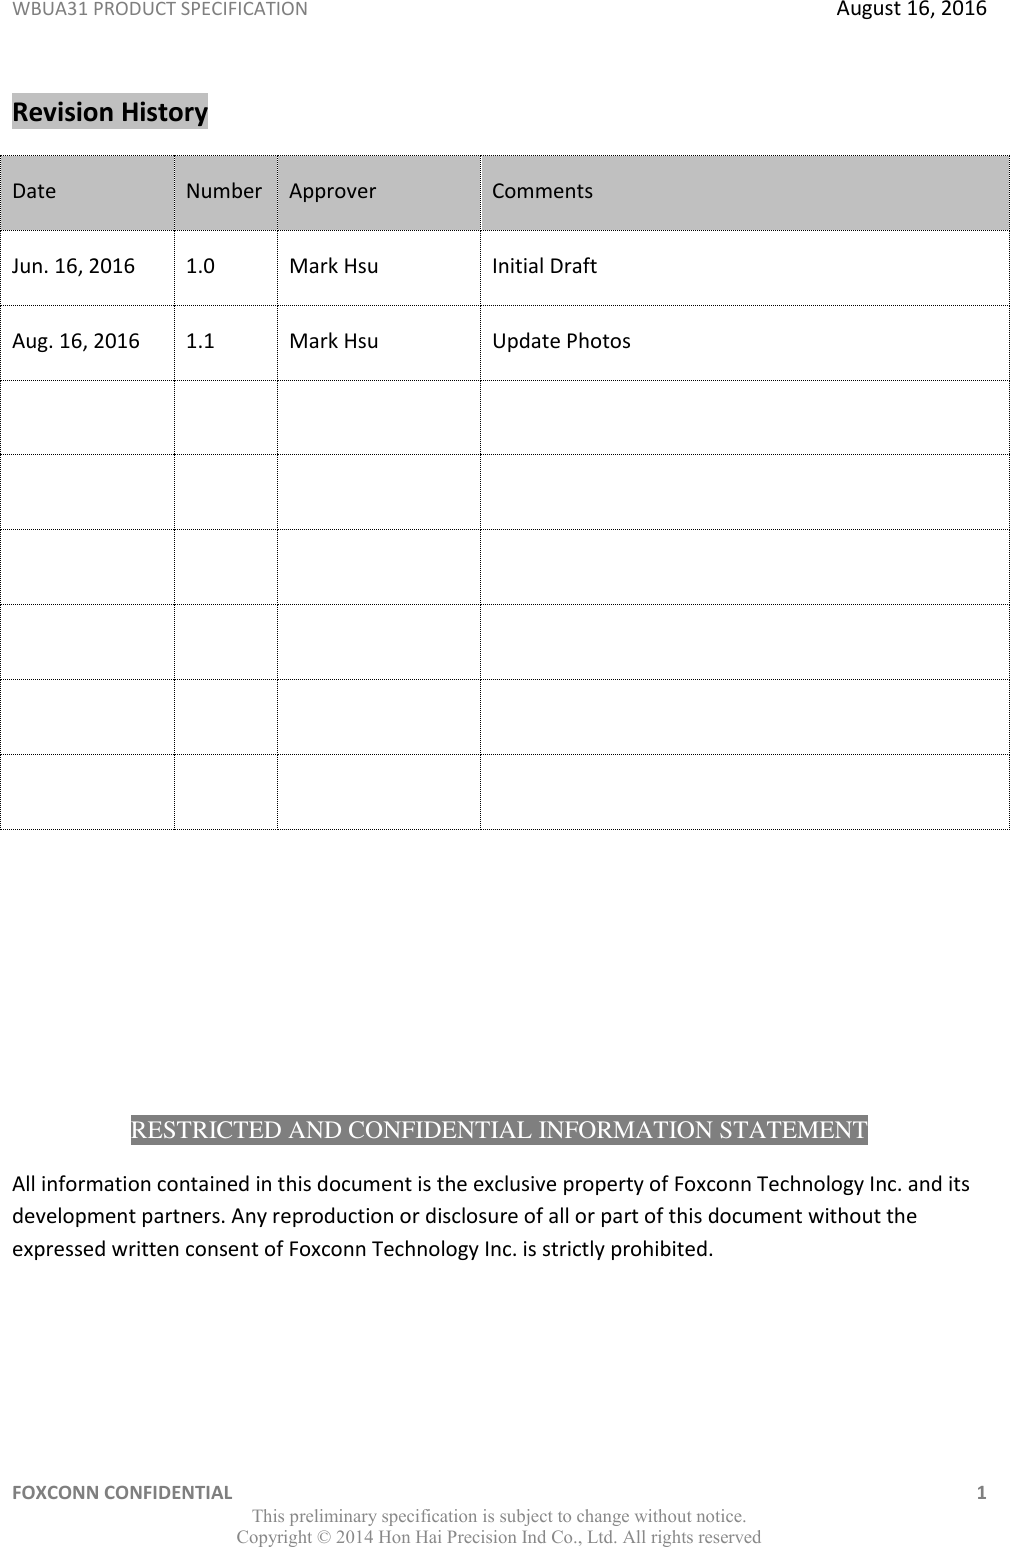 WBUA31 PRODUCT SPECIFICATION  August 16, 2016 FOXCONN CONFIDENTIAL    1 This preliminary specification is subject to change without notice. Copyright ©  2014 Hon Hai Precision Ind Co., Ltd. All rights reserved Revision History Date Number Approver Comments Jun. 16, 2016 1.0 Mark Hsu Initial Draft Aug. 16, 2016 1.1 Mark Hsu Update Photos                                RESTRICTED AND CONFIDENTIAL INFORMATION STATEMENT All information contained in this document is the exclusive property of Foxconn Technology Inc. and its development partners. Any reproduction or disclosure of all or part of this document without the expressed written consent of Foxconn Technology Inc. is strictly prohibited.  